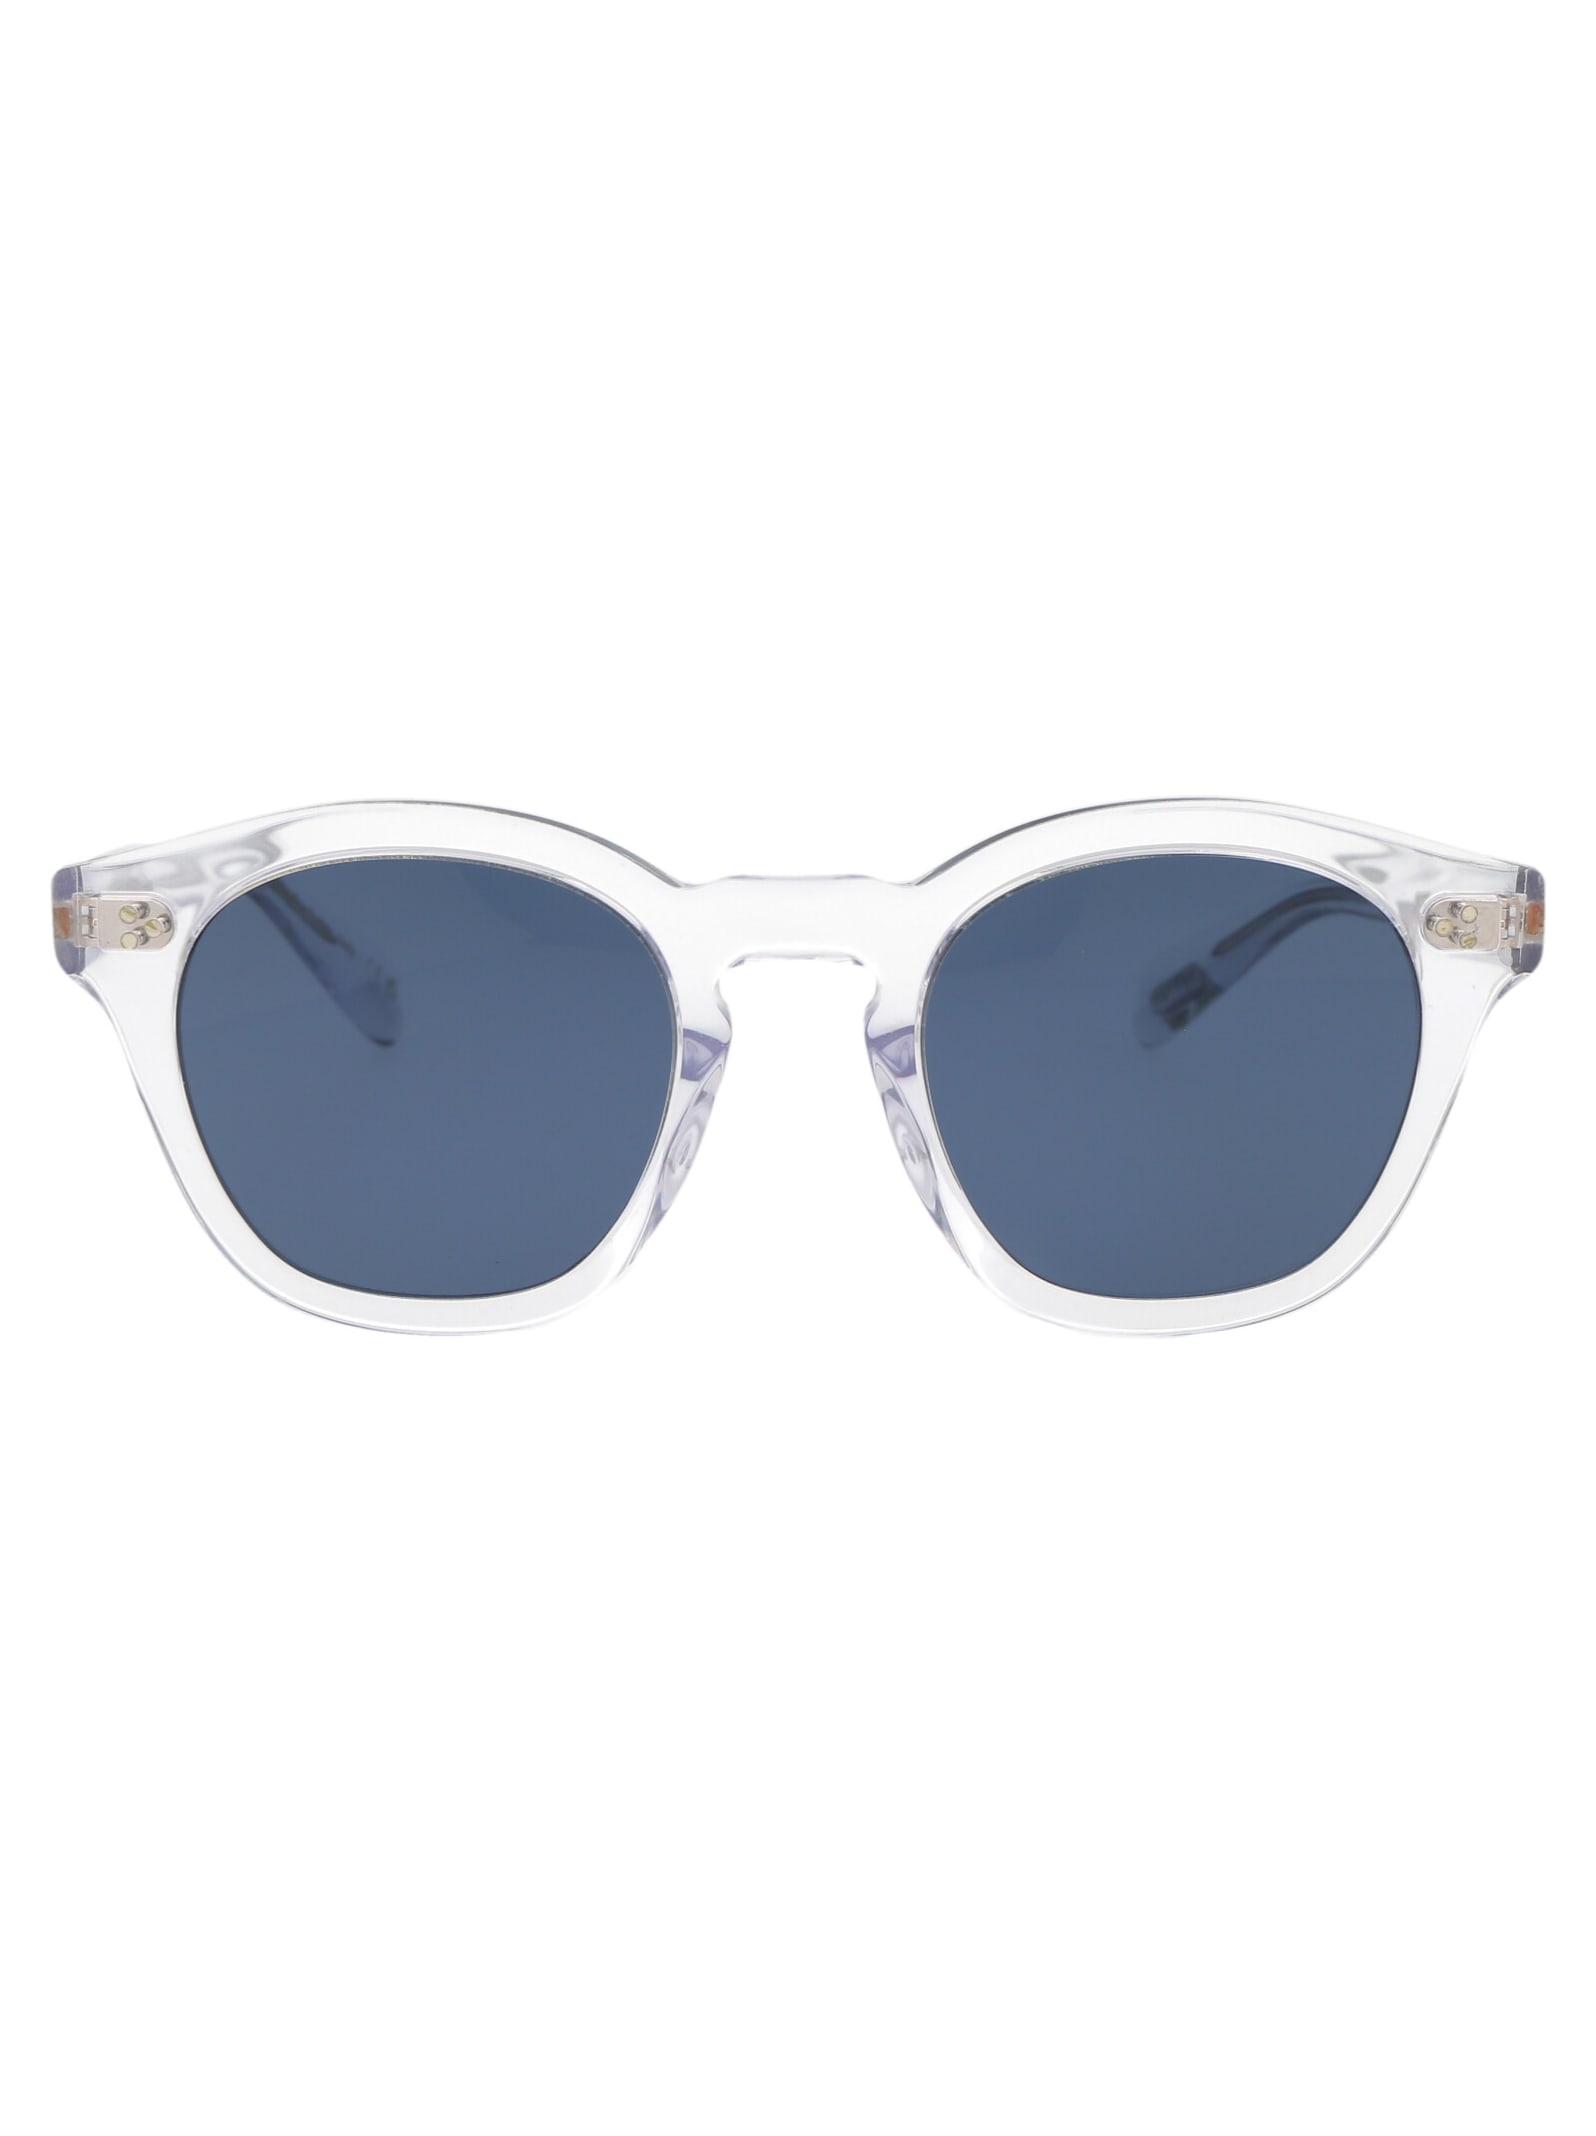 Shop Oliver Peoples Boudreau L.a Sunglasses In 110180 Crystal